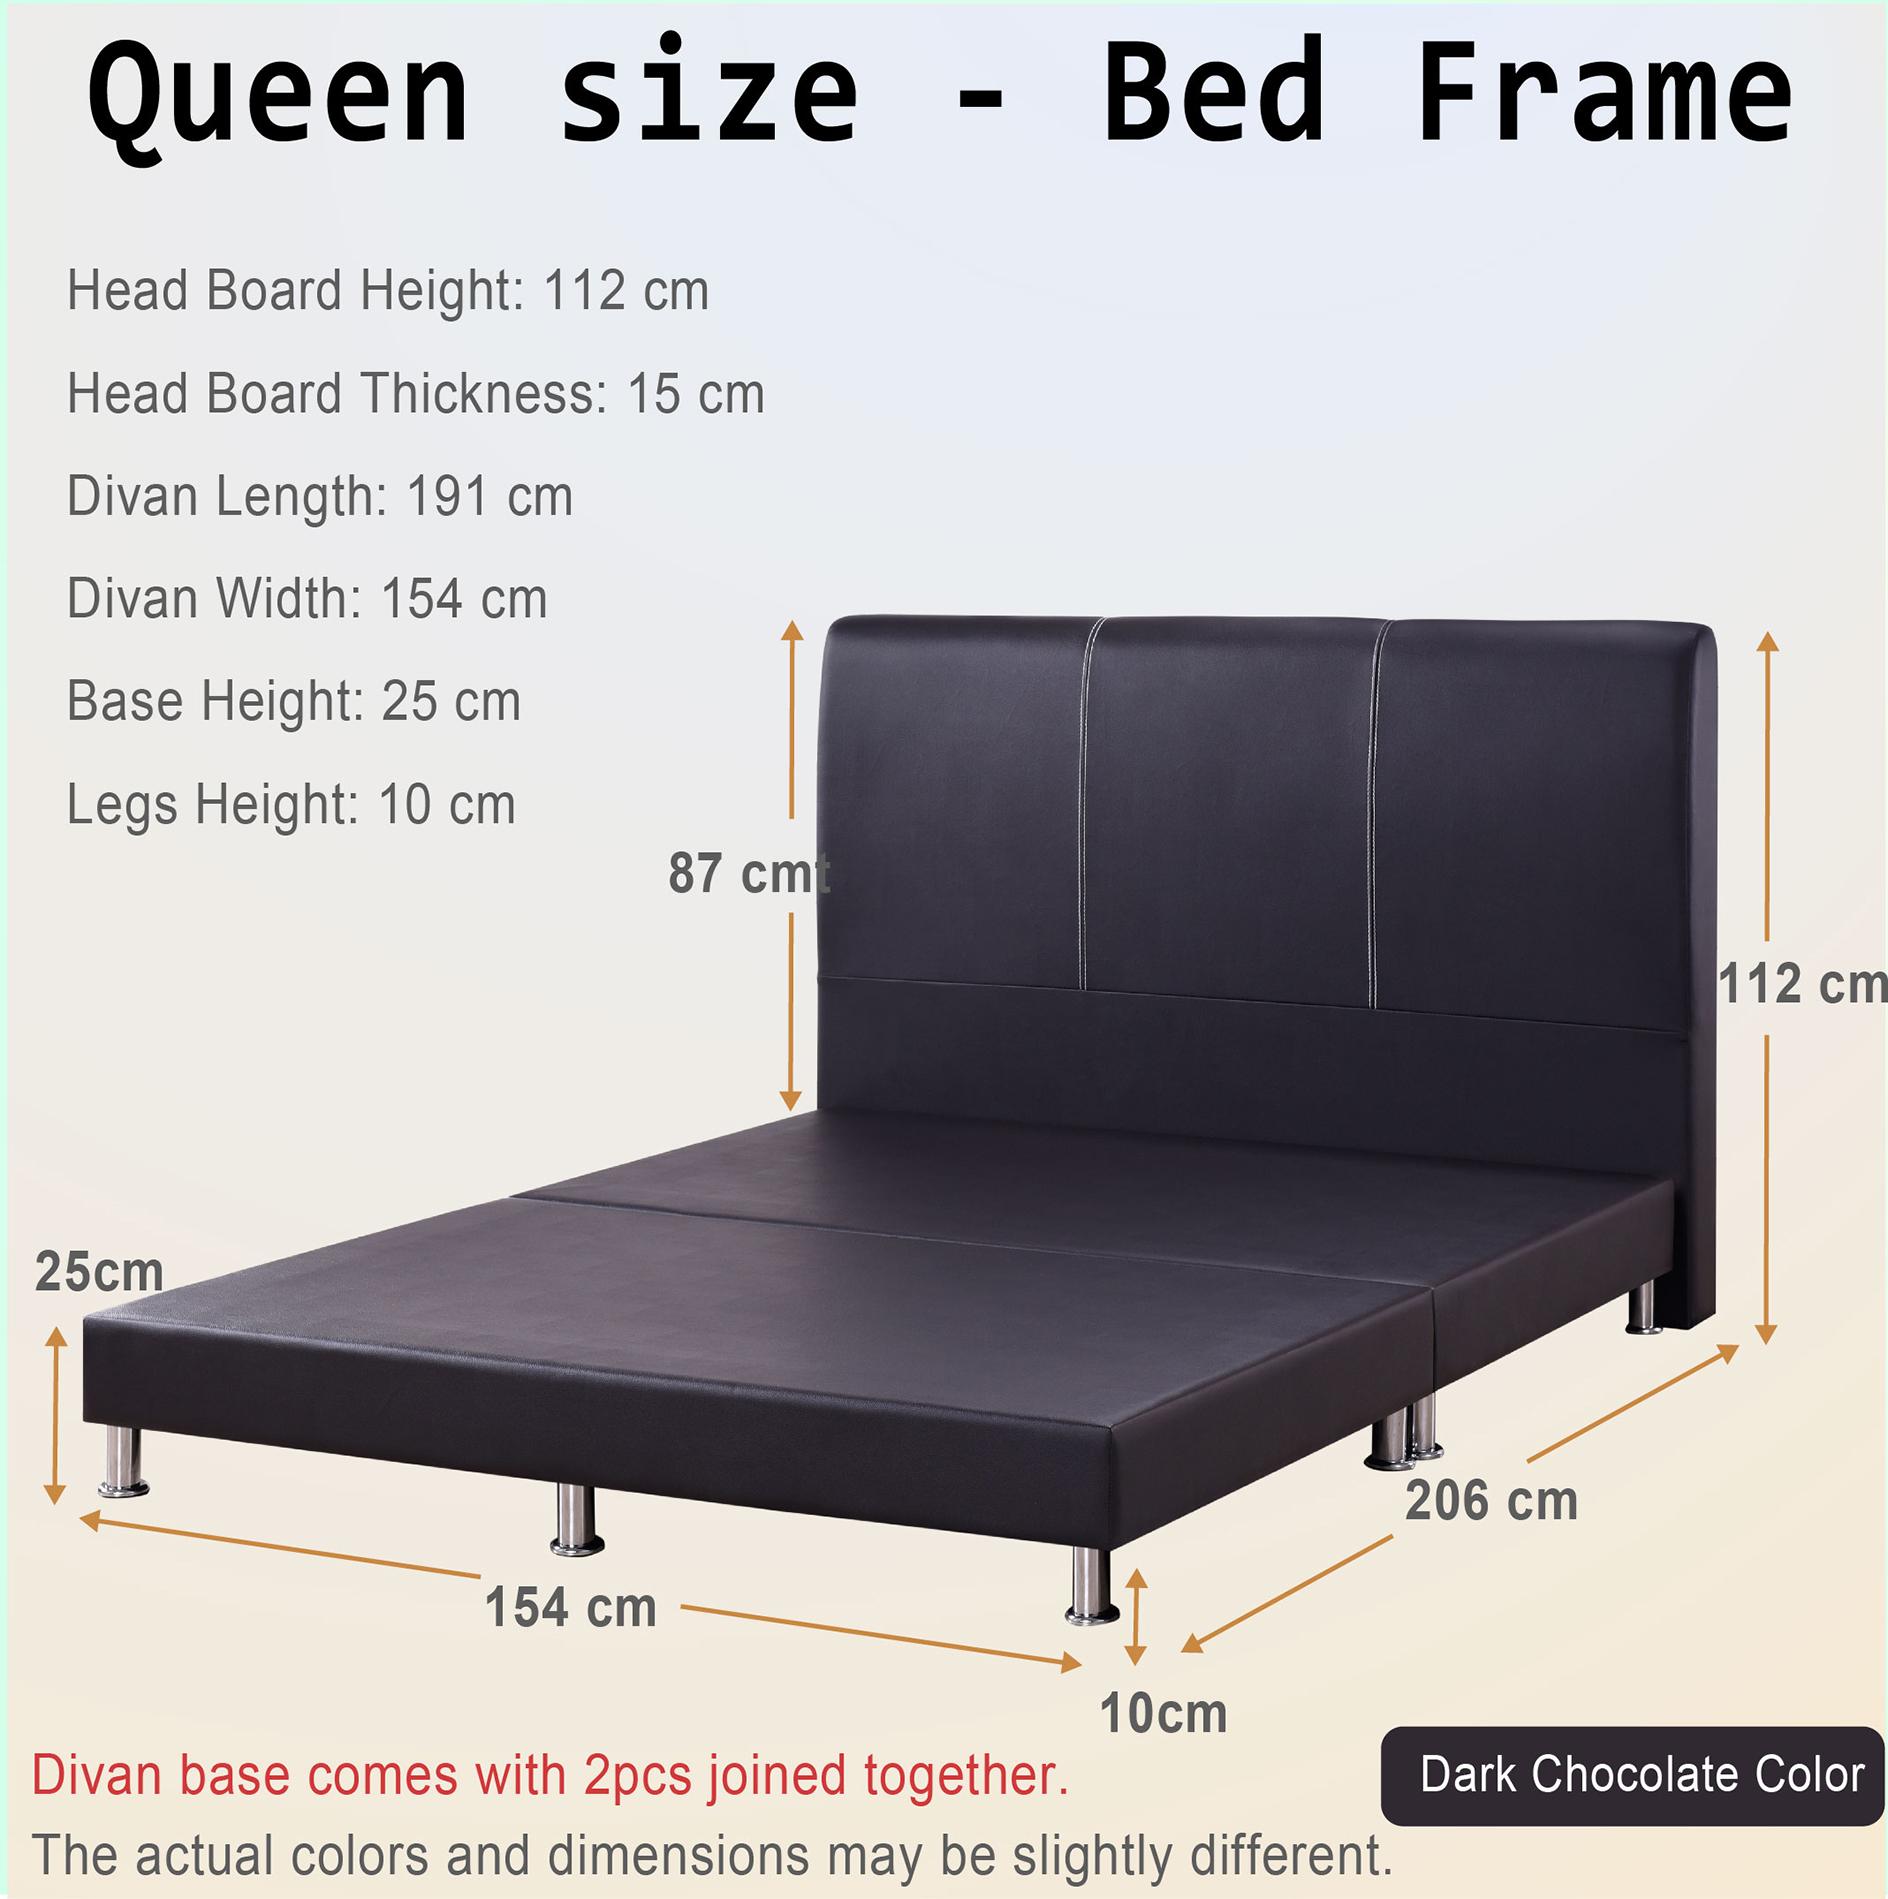 Queen Size Bed Frame Un402, Queen Size Bed Dimensions Cm Singapore